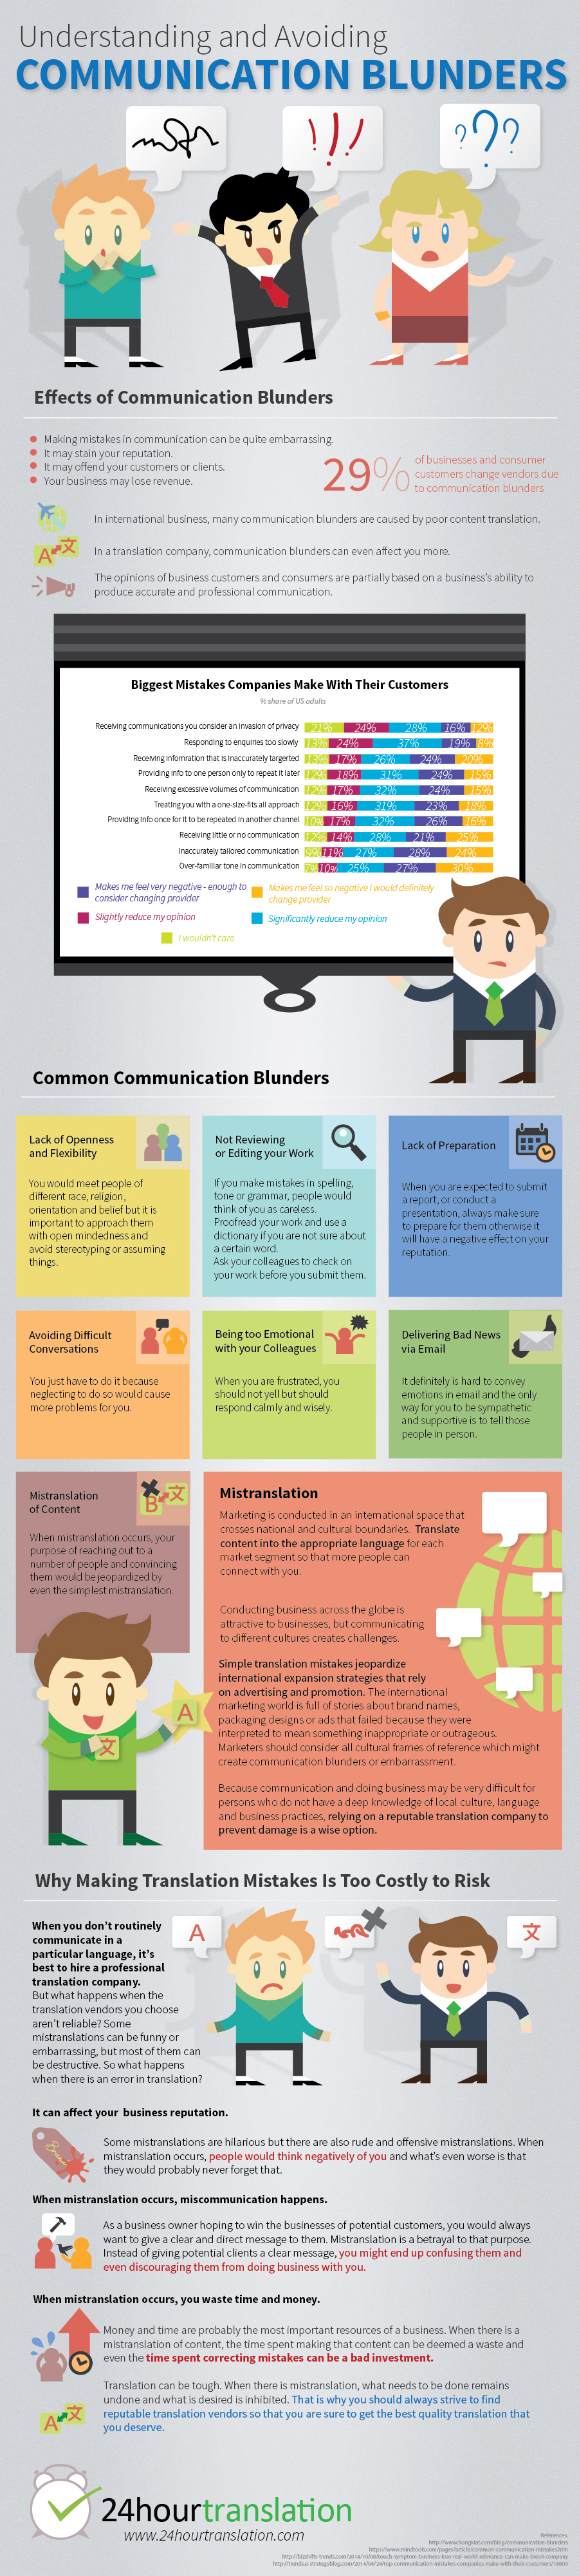 Common Communication Blunders Infographic